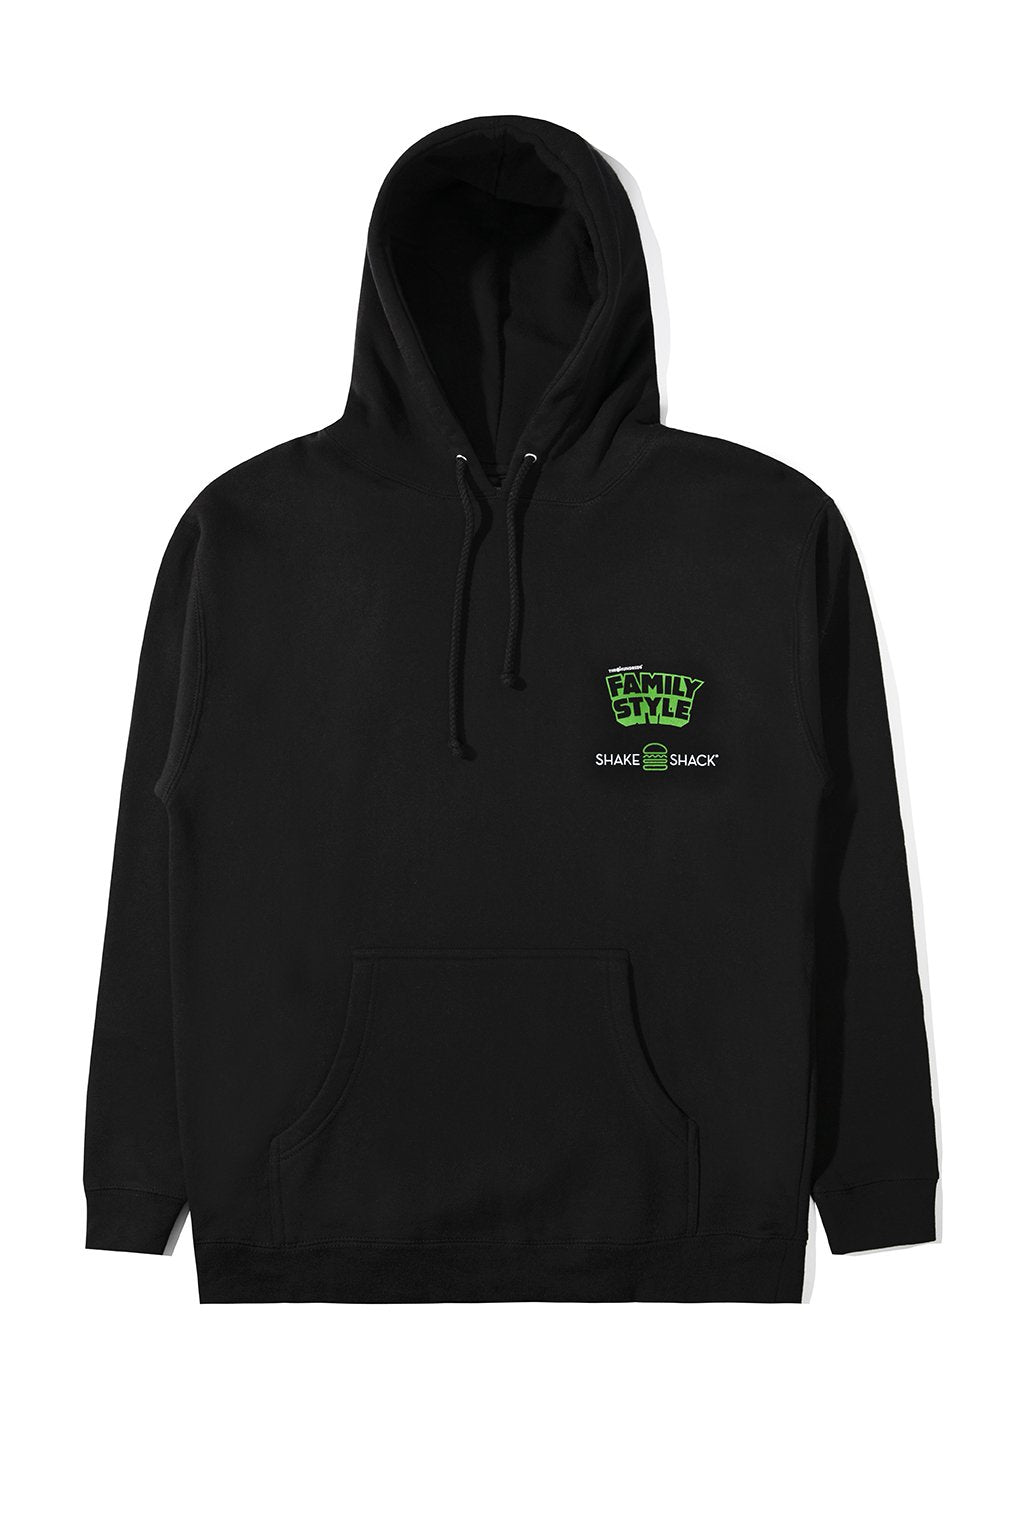 Family Style X Shake Shack Pullover Hoodie